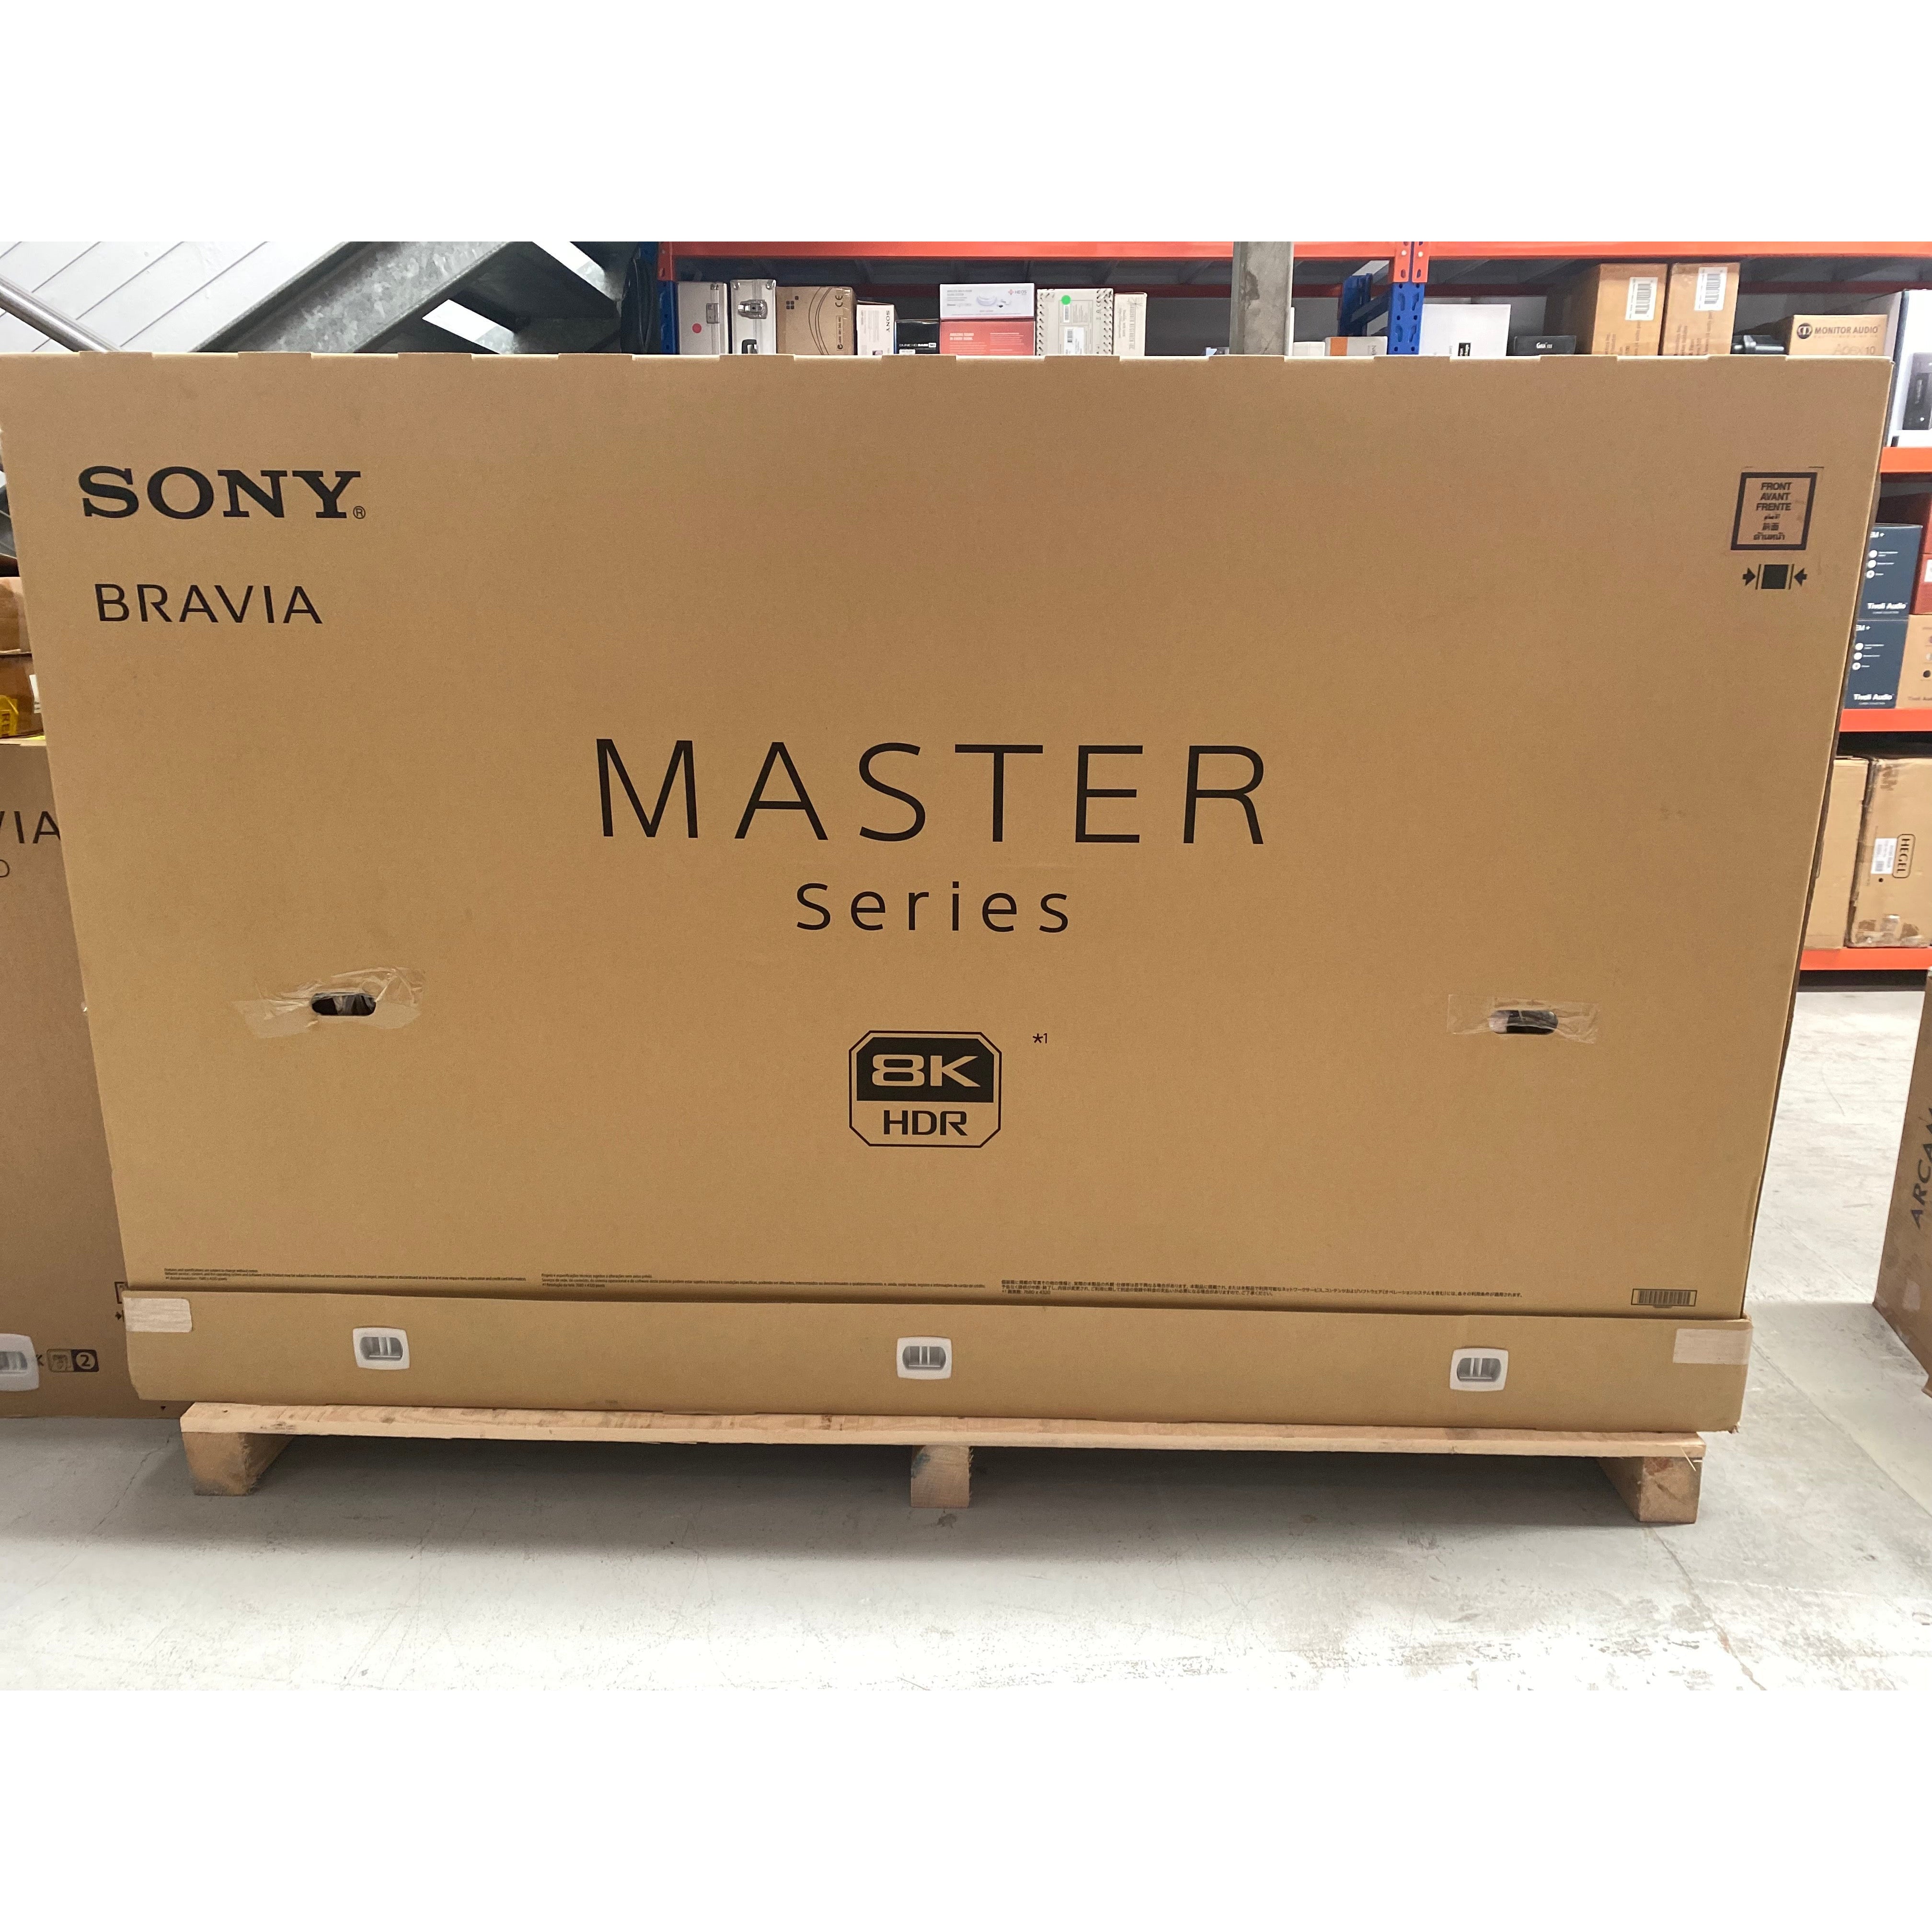 Sony 85" Z9G | MASTER Series | LED | 8K | Televison - Consignment